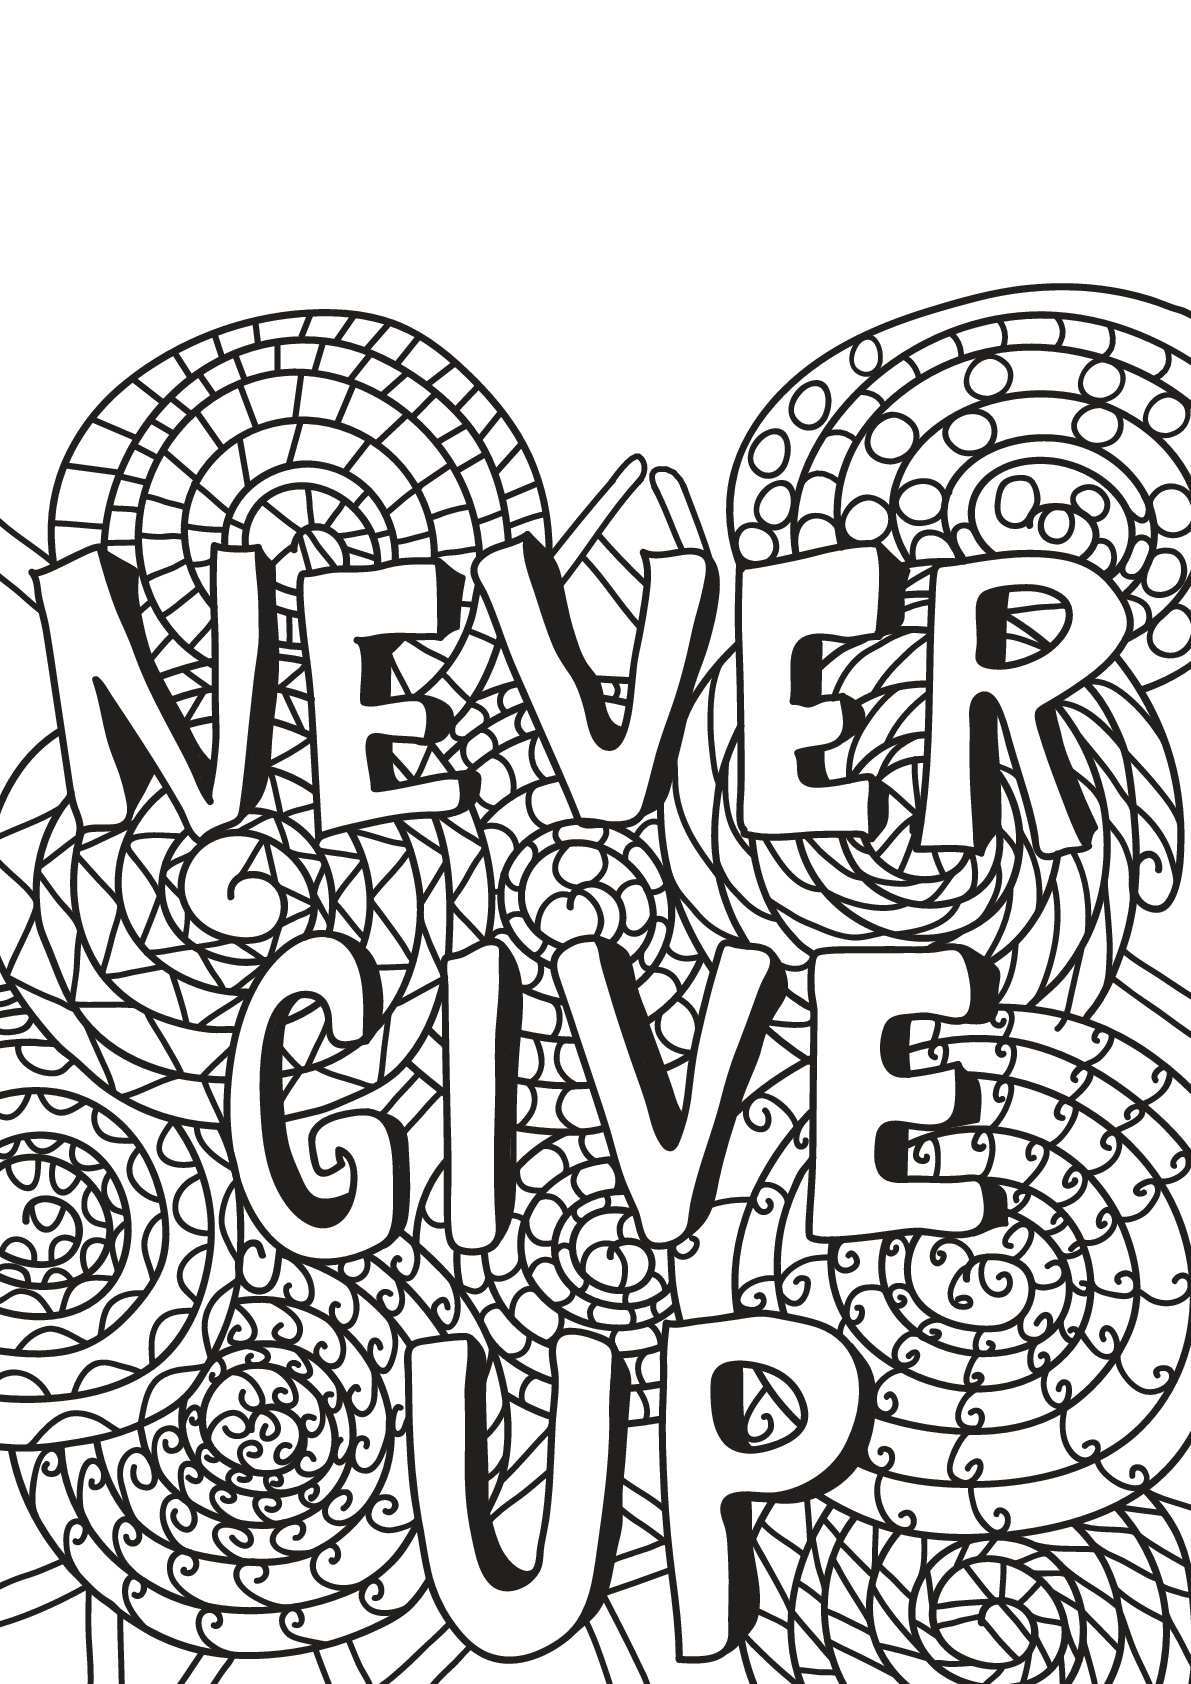 Download Free book quote 14 - Quotes Adult Coloring Pages